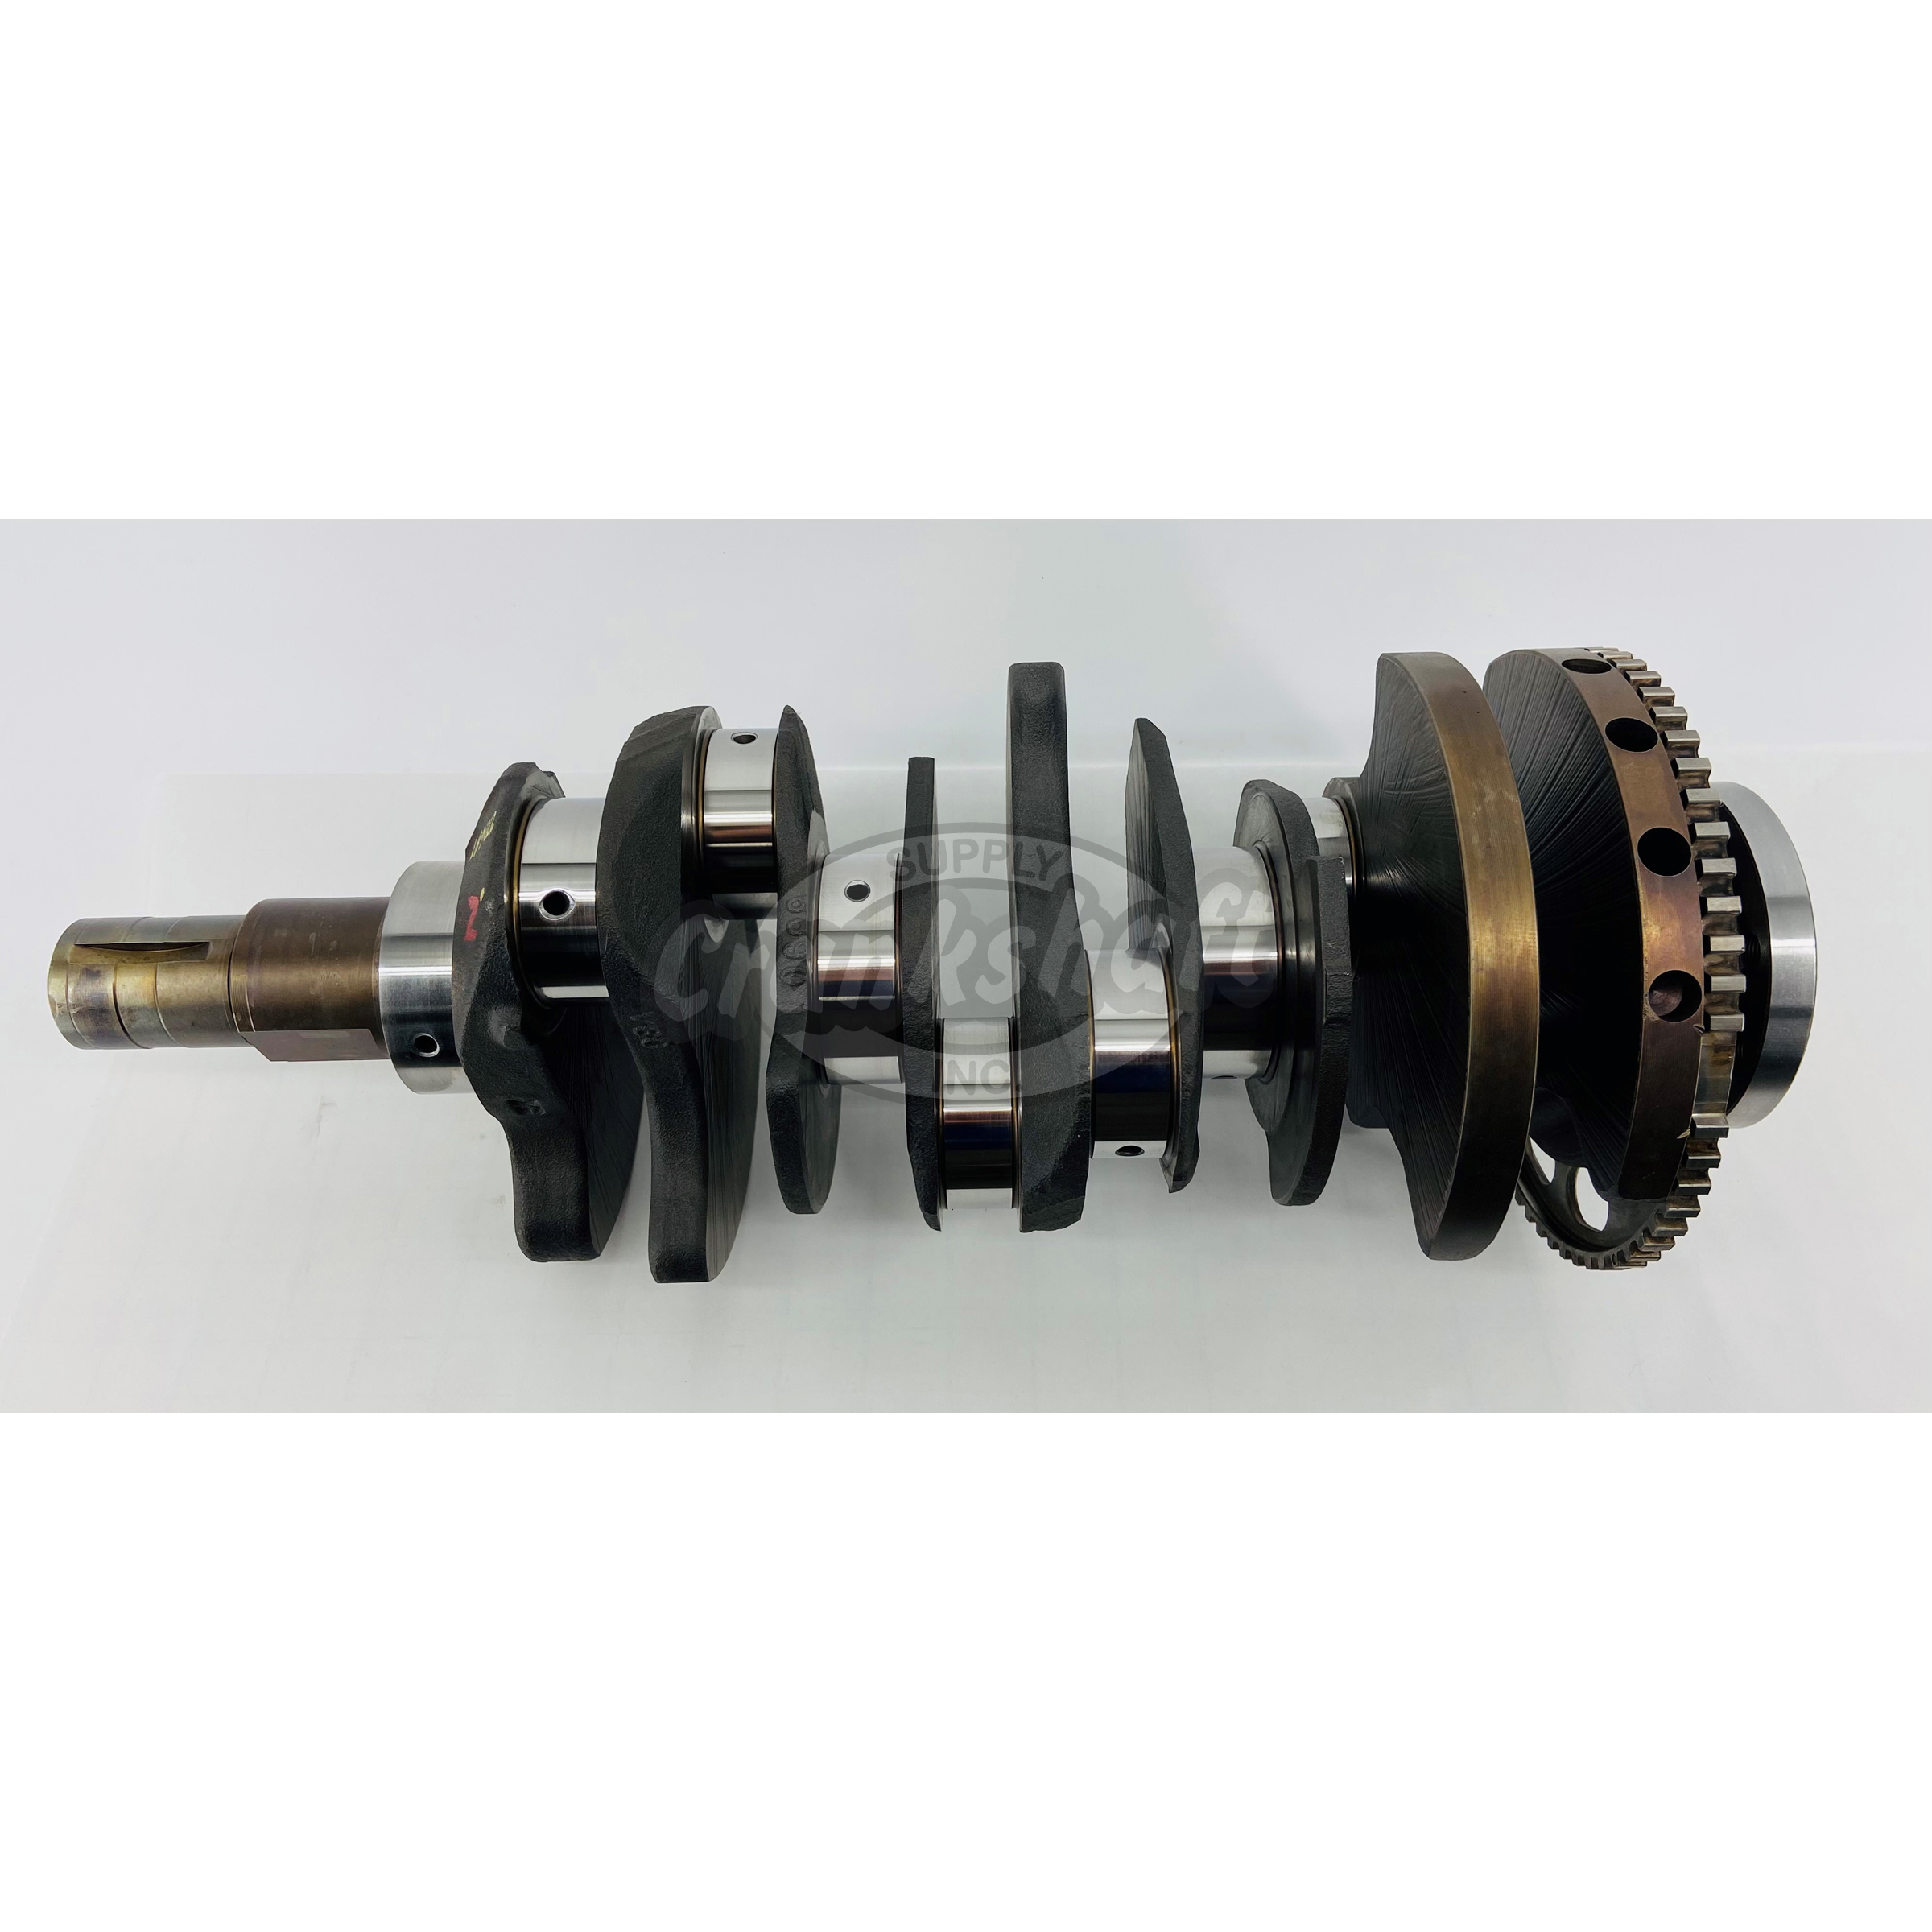 What is a crankshaft and what does it do?